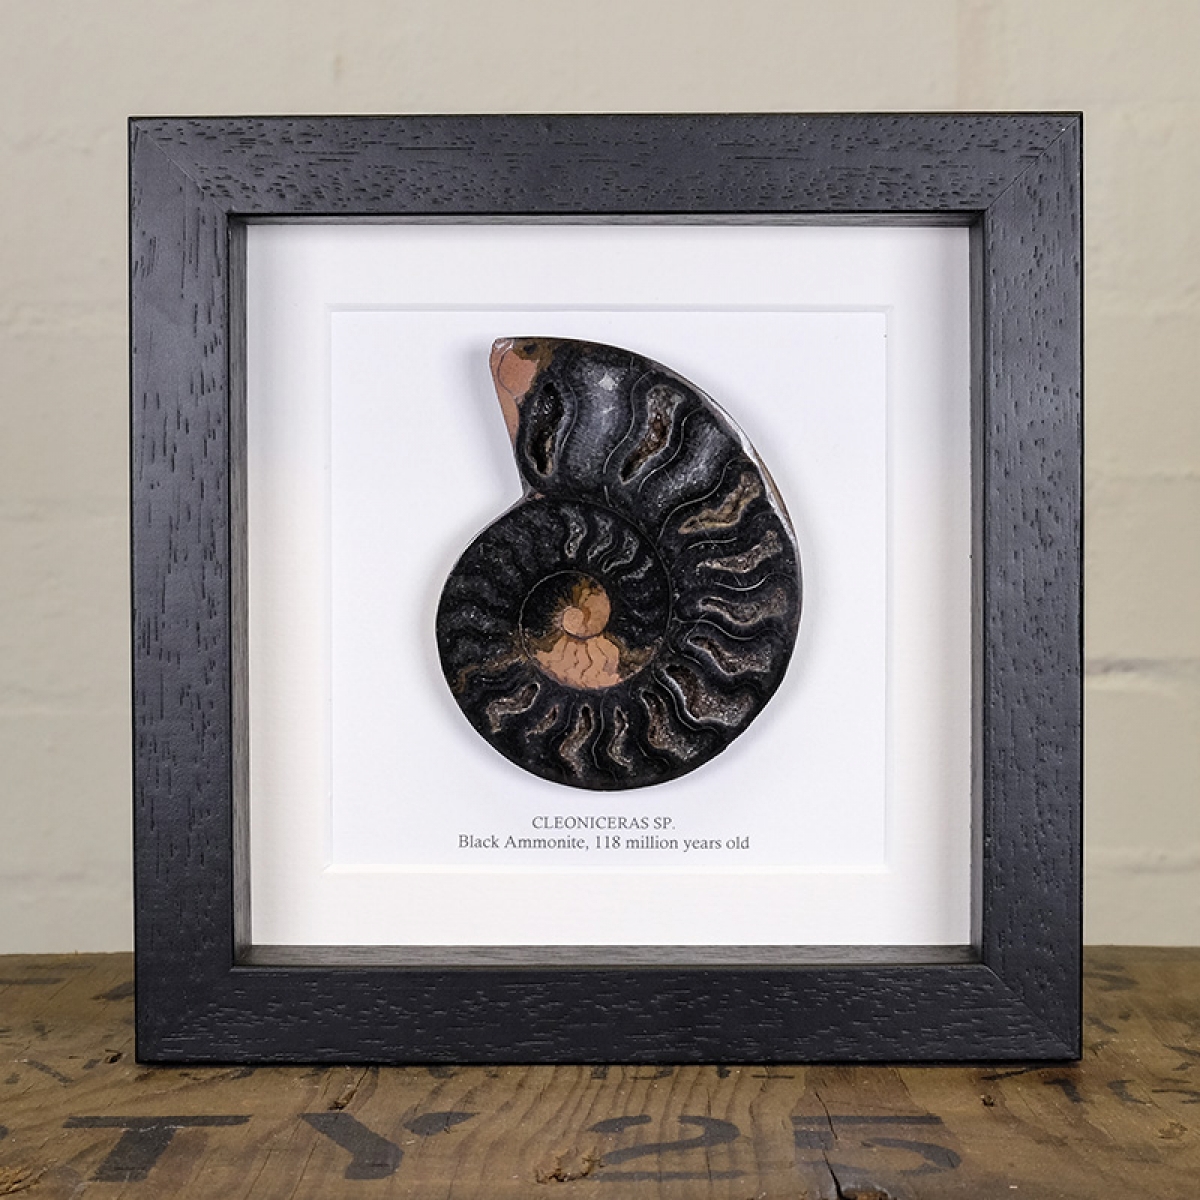 Minibeast Black Ammonite Cut and Polished Fossil in Box Frame (Cleoniceras sp) - Specimen #03